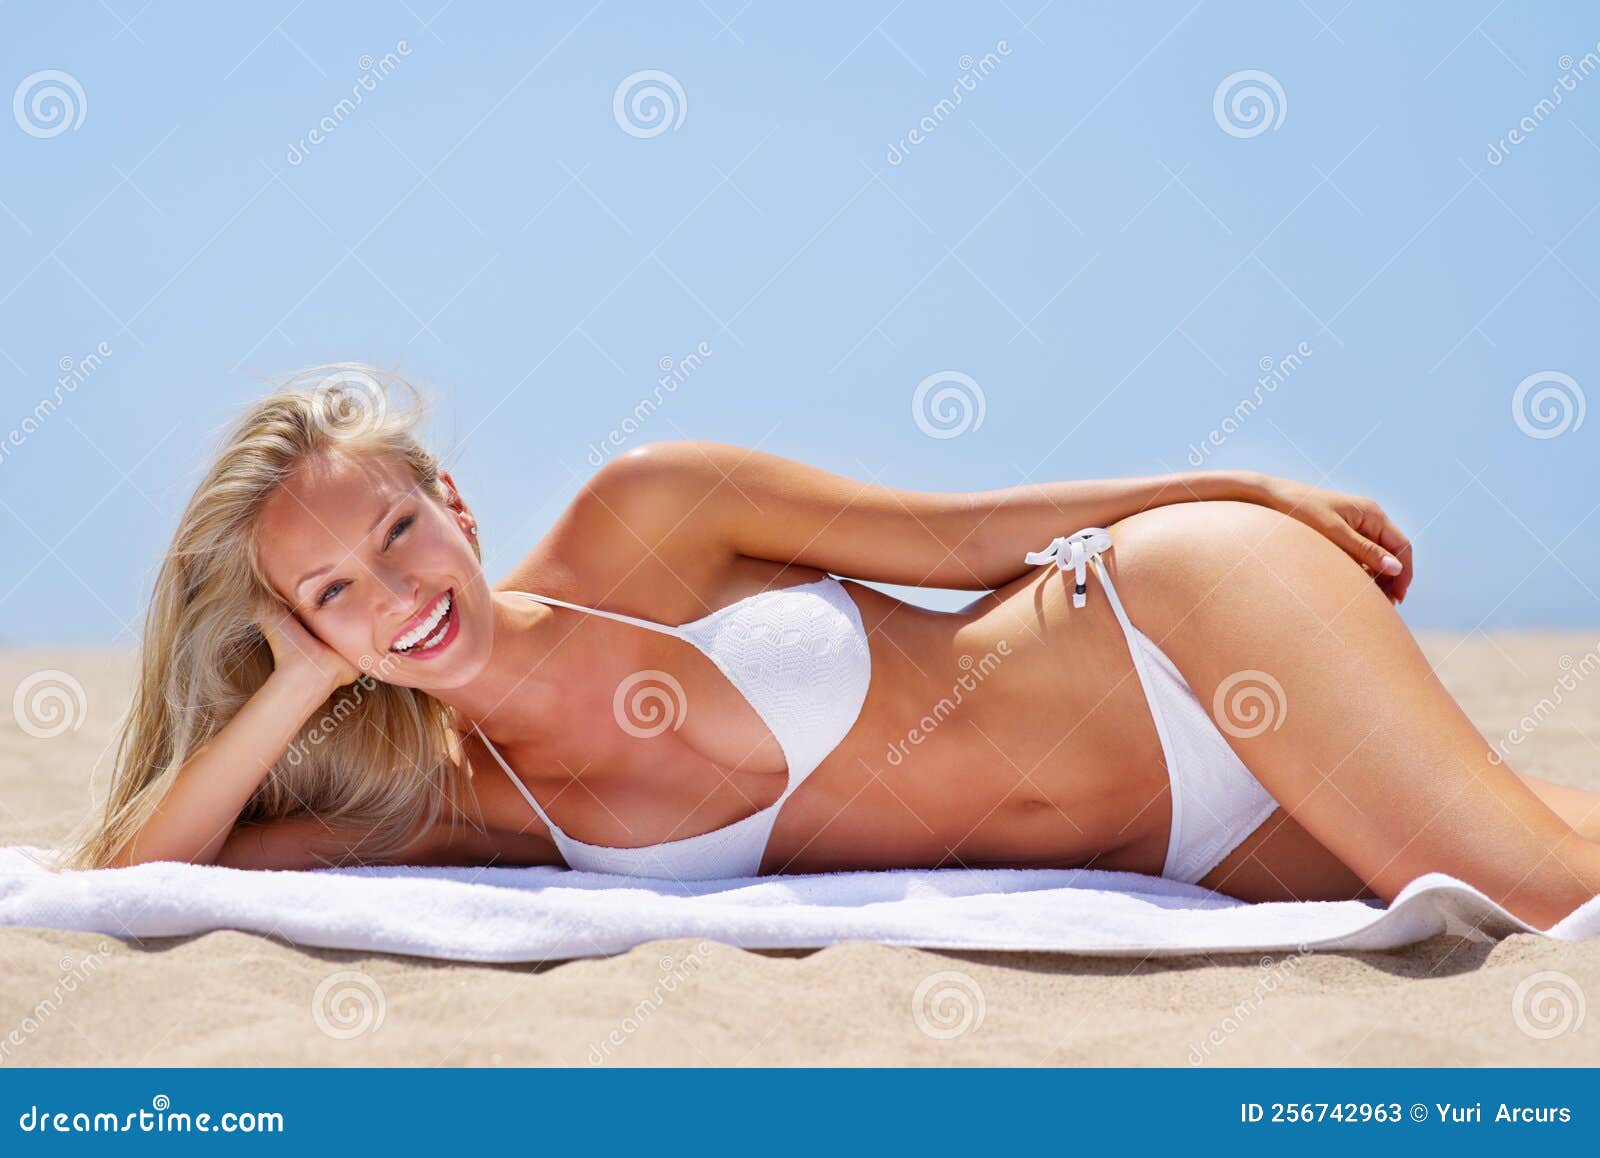 Sun, Sand and Plenty of Sexy. a Sun Kissed Woman Relaxing on the Beach in a  Bikini. Stock Image - Image of blondie, beach: 256742963